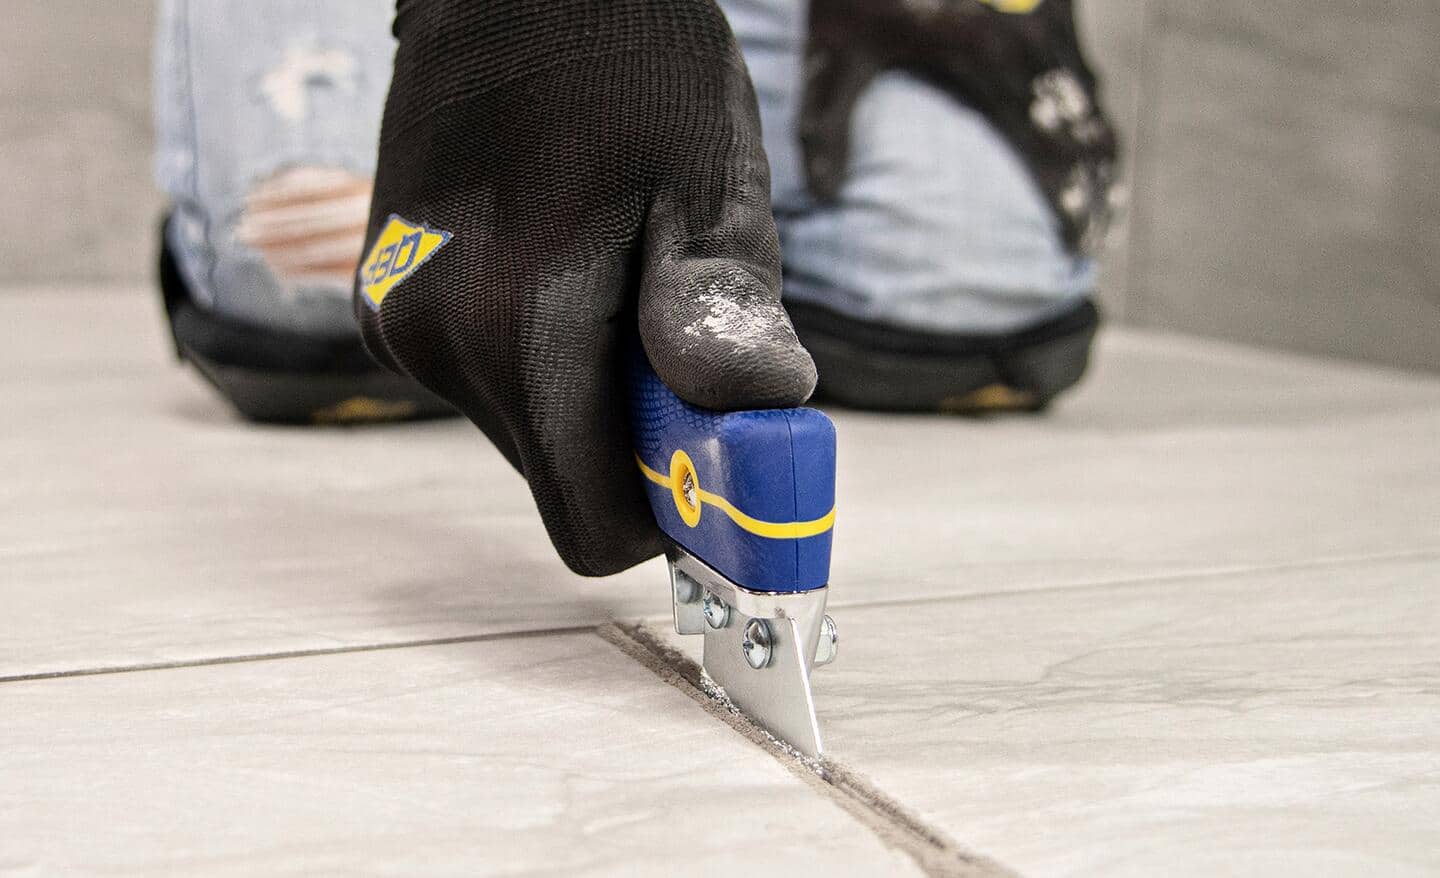 Person uses a grout saw to remove grout between tiles